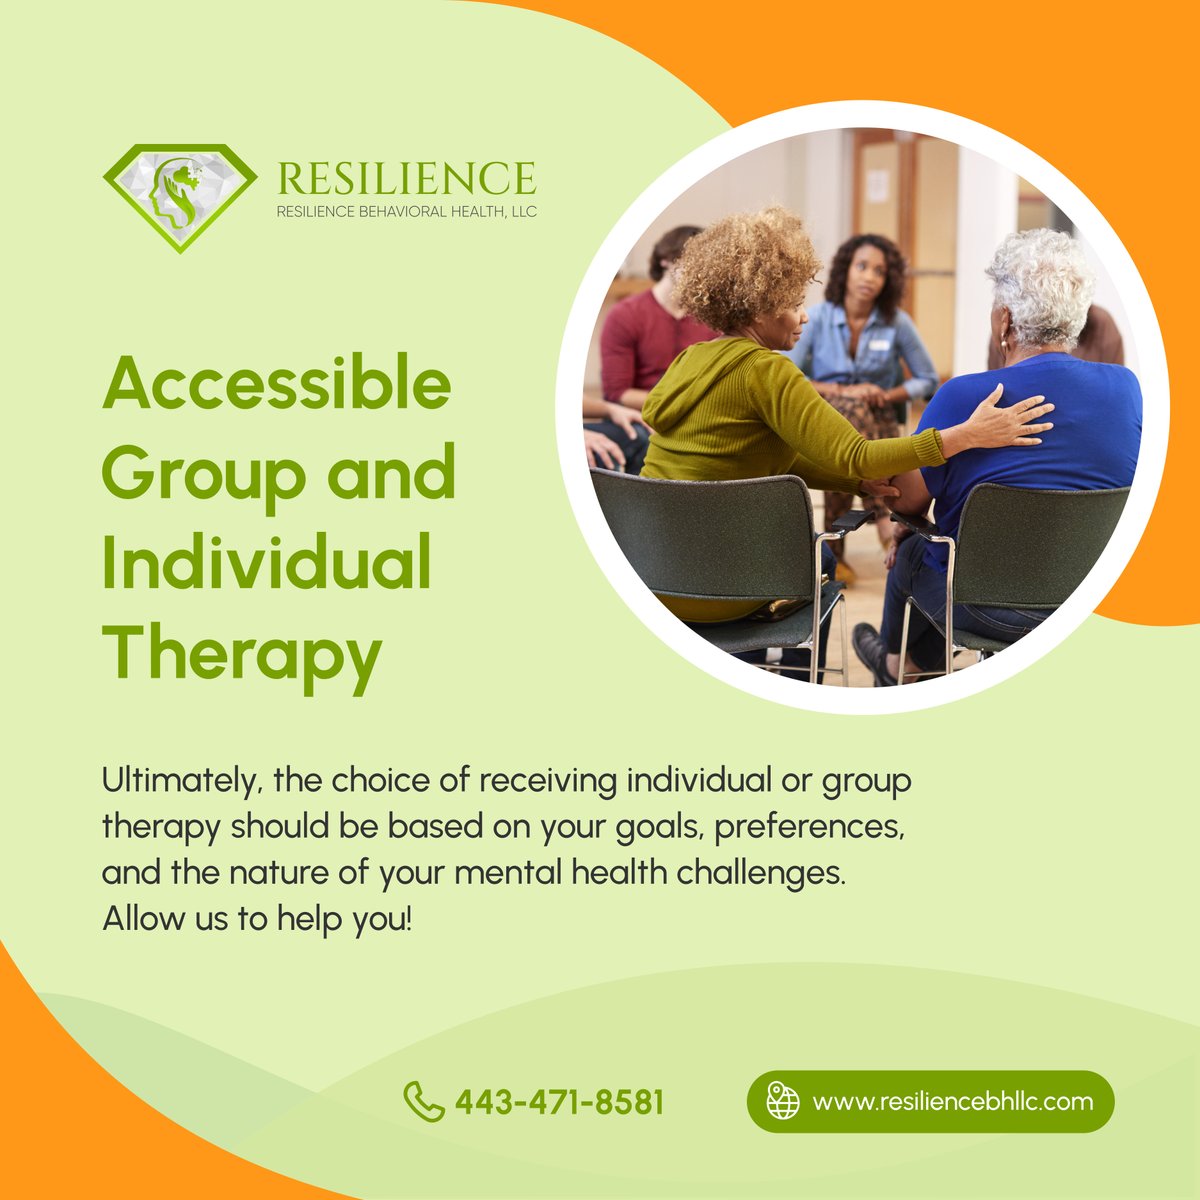 Both group therapy and individual therapy are evidence-based mental health treatments. This is why we do everything we can to make both approaches easily accessible and convenient for our valued community.

#BehavioralHealthCare #PikesvilleMD #IndividualTherapy #GroupTherapy